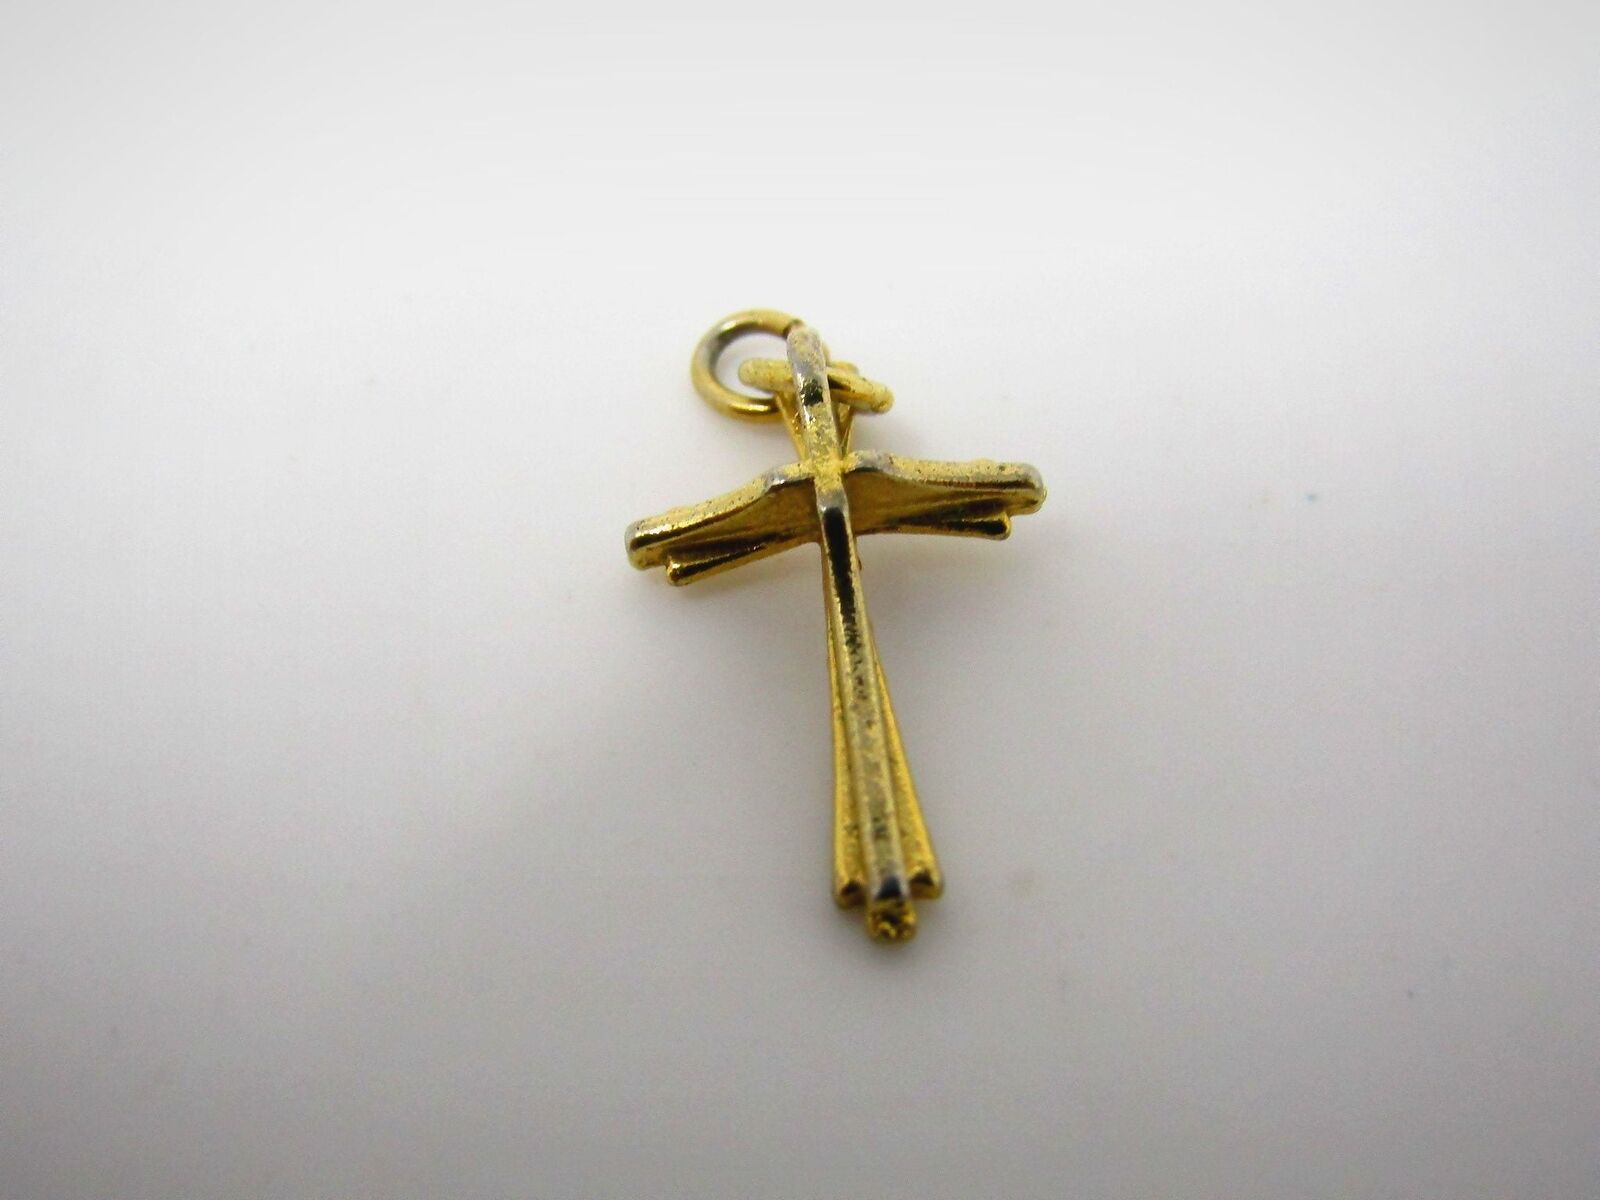 Small Vintage Christian Cross Necklace Pendant: Gold Tone